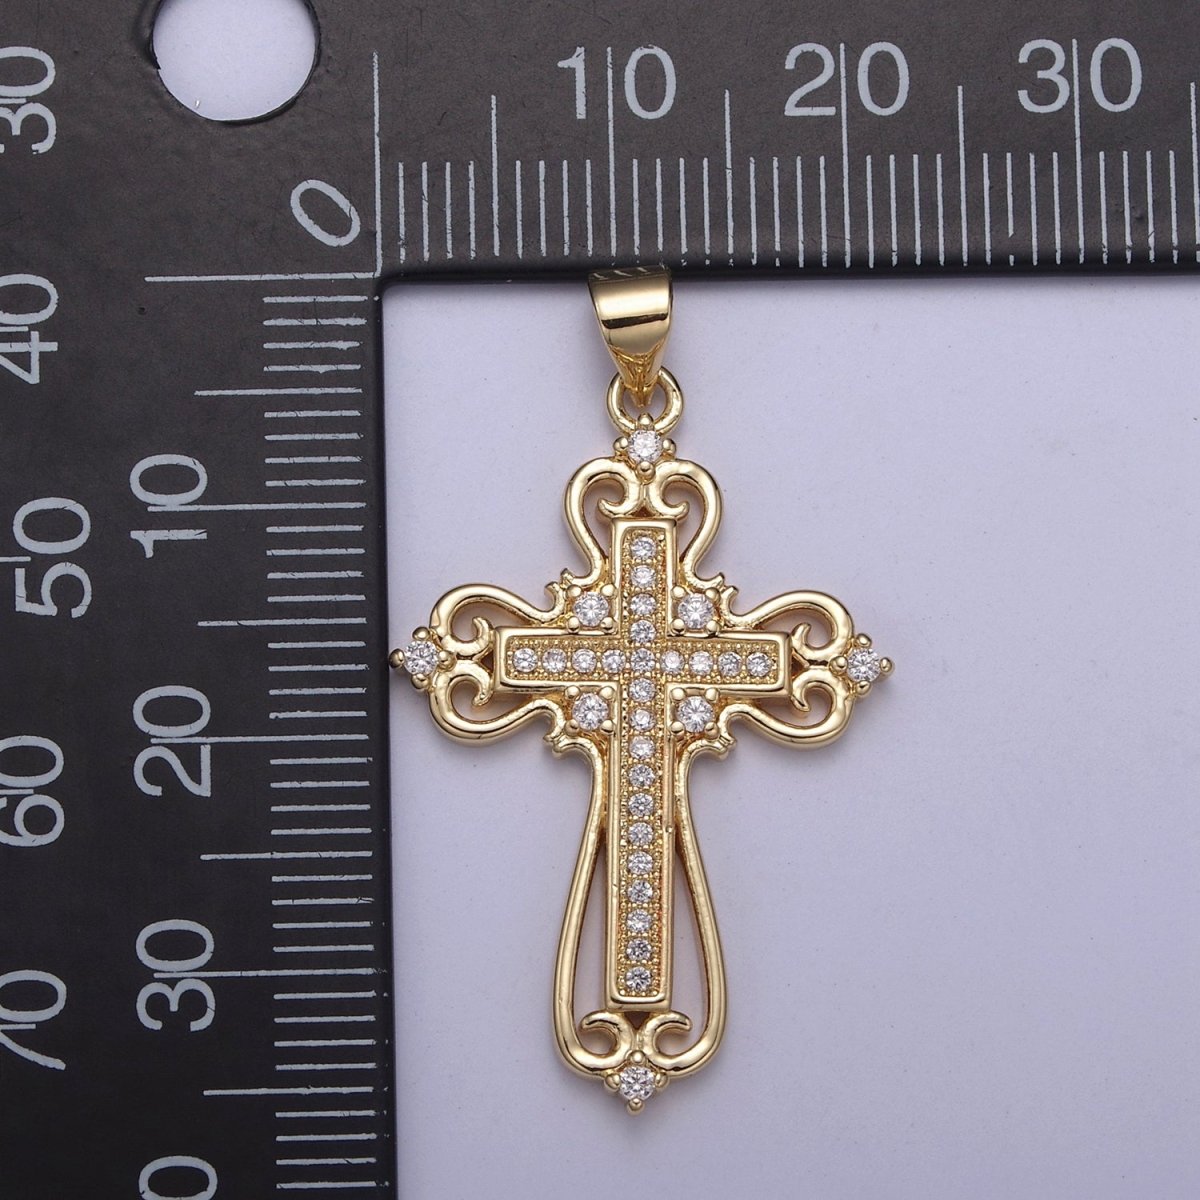 Beautiful Gold Ornate Cross Necklace Pendant Charm for Religious Christian Catholic Jewelry Making H-404 - DLUXCA